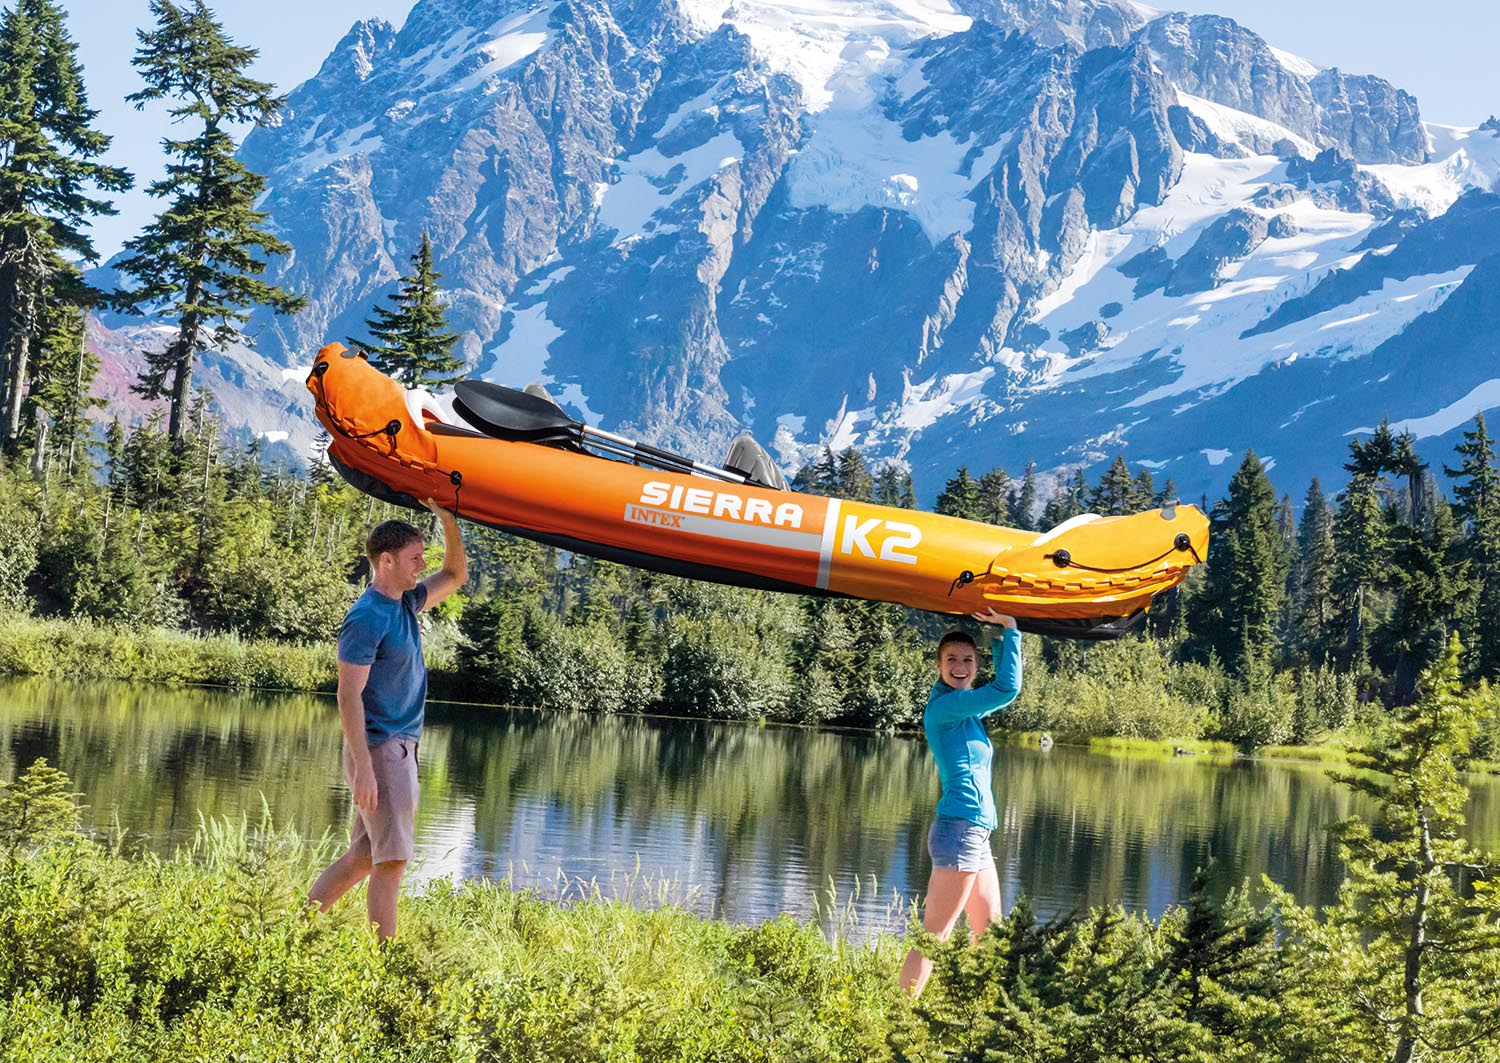 Intex Sierra K2 Inflatable Kayak with Oars and Hand Pump - image 5 of 12